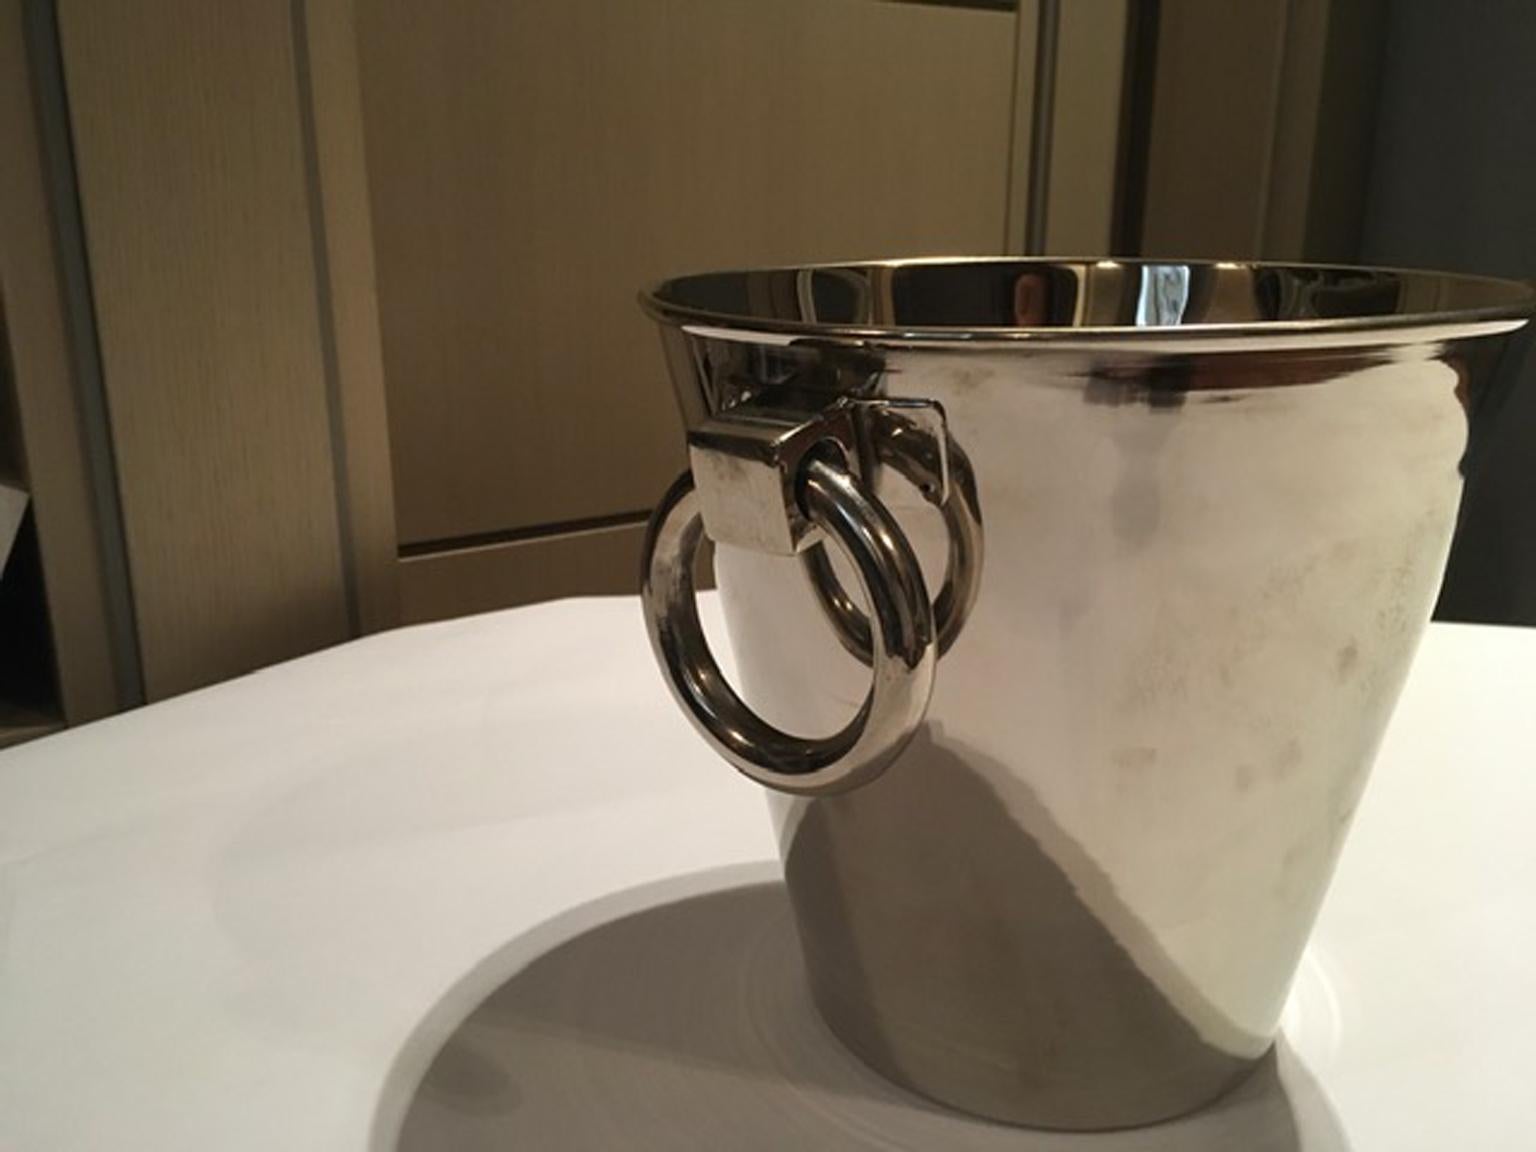 This elegant model of ice bucket is realized in silver plated metal. The contemporary Italian design add a plus at this piece. A pair of rings is a decorative detail useful as handles too.